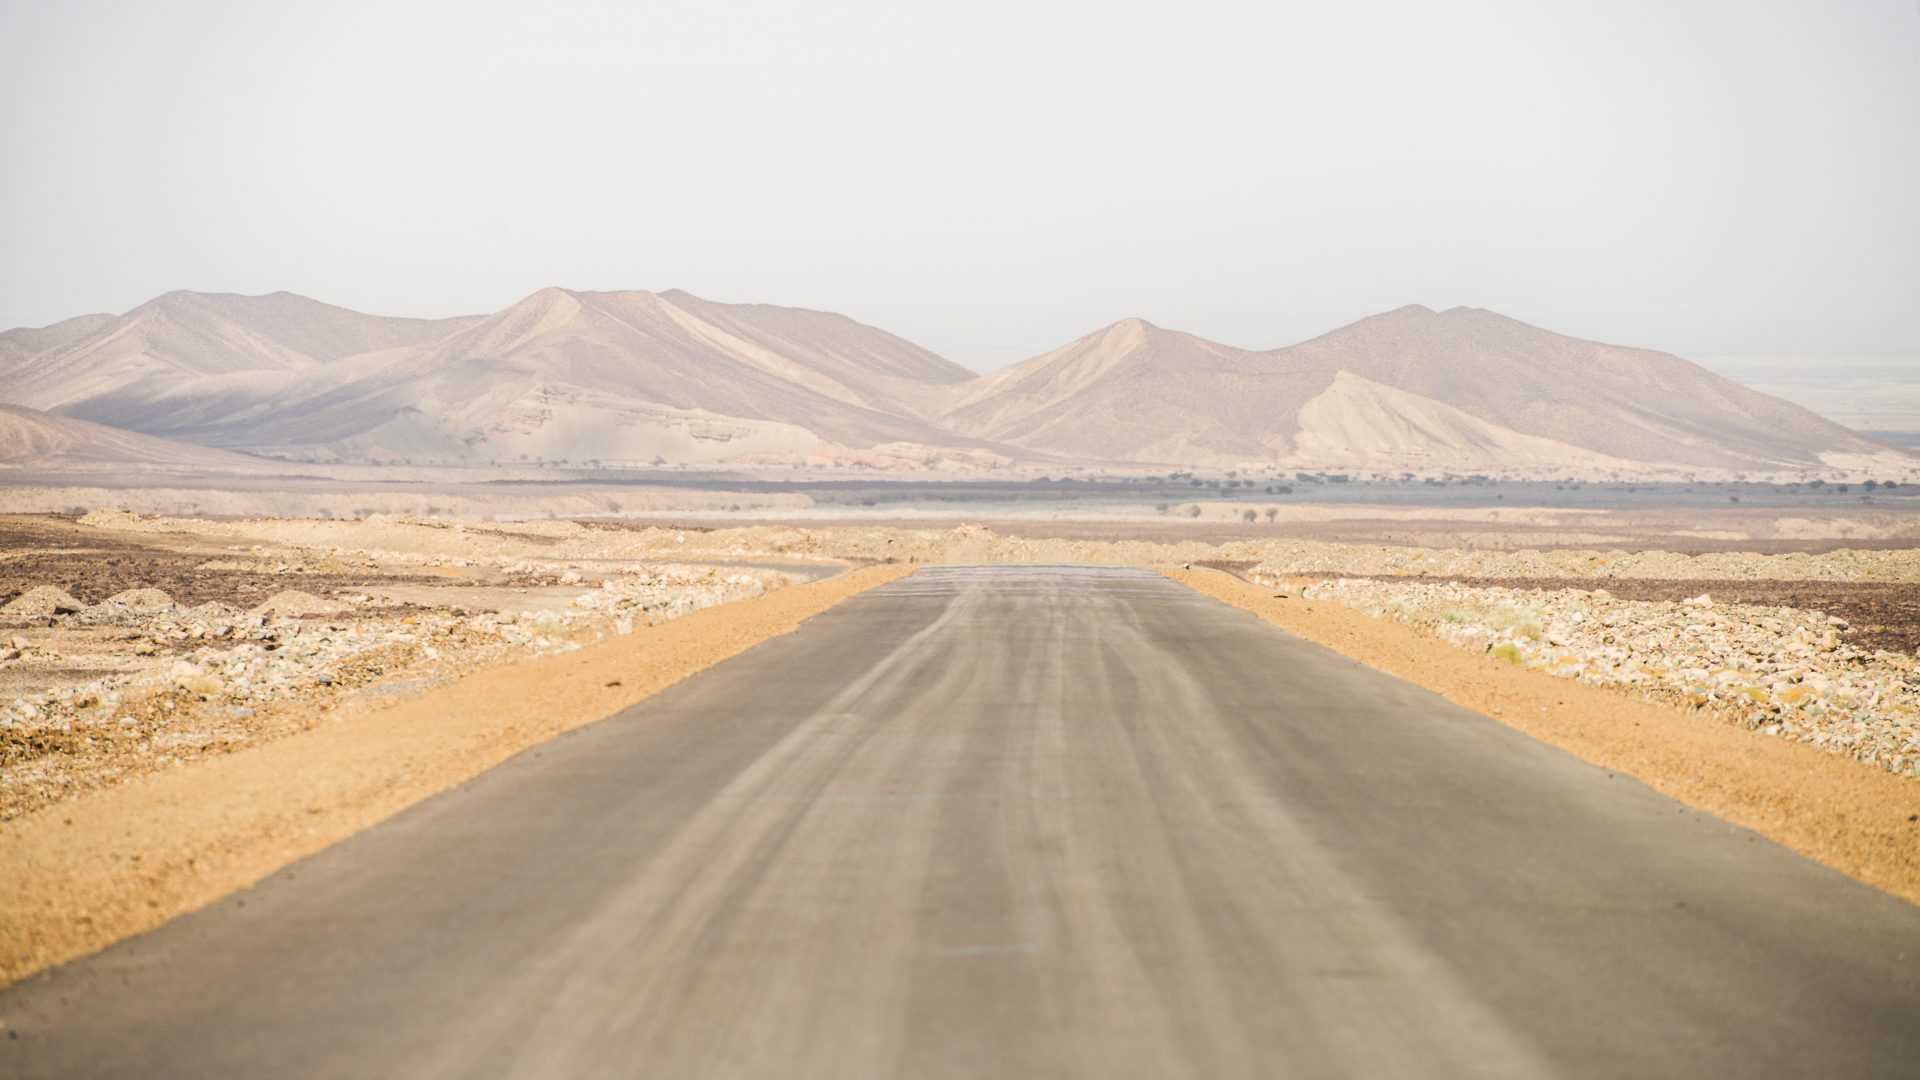 A road leads to arid mountains in the Danakil Depression, Ethiopia.